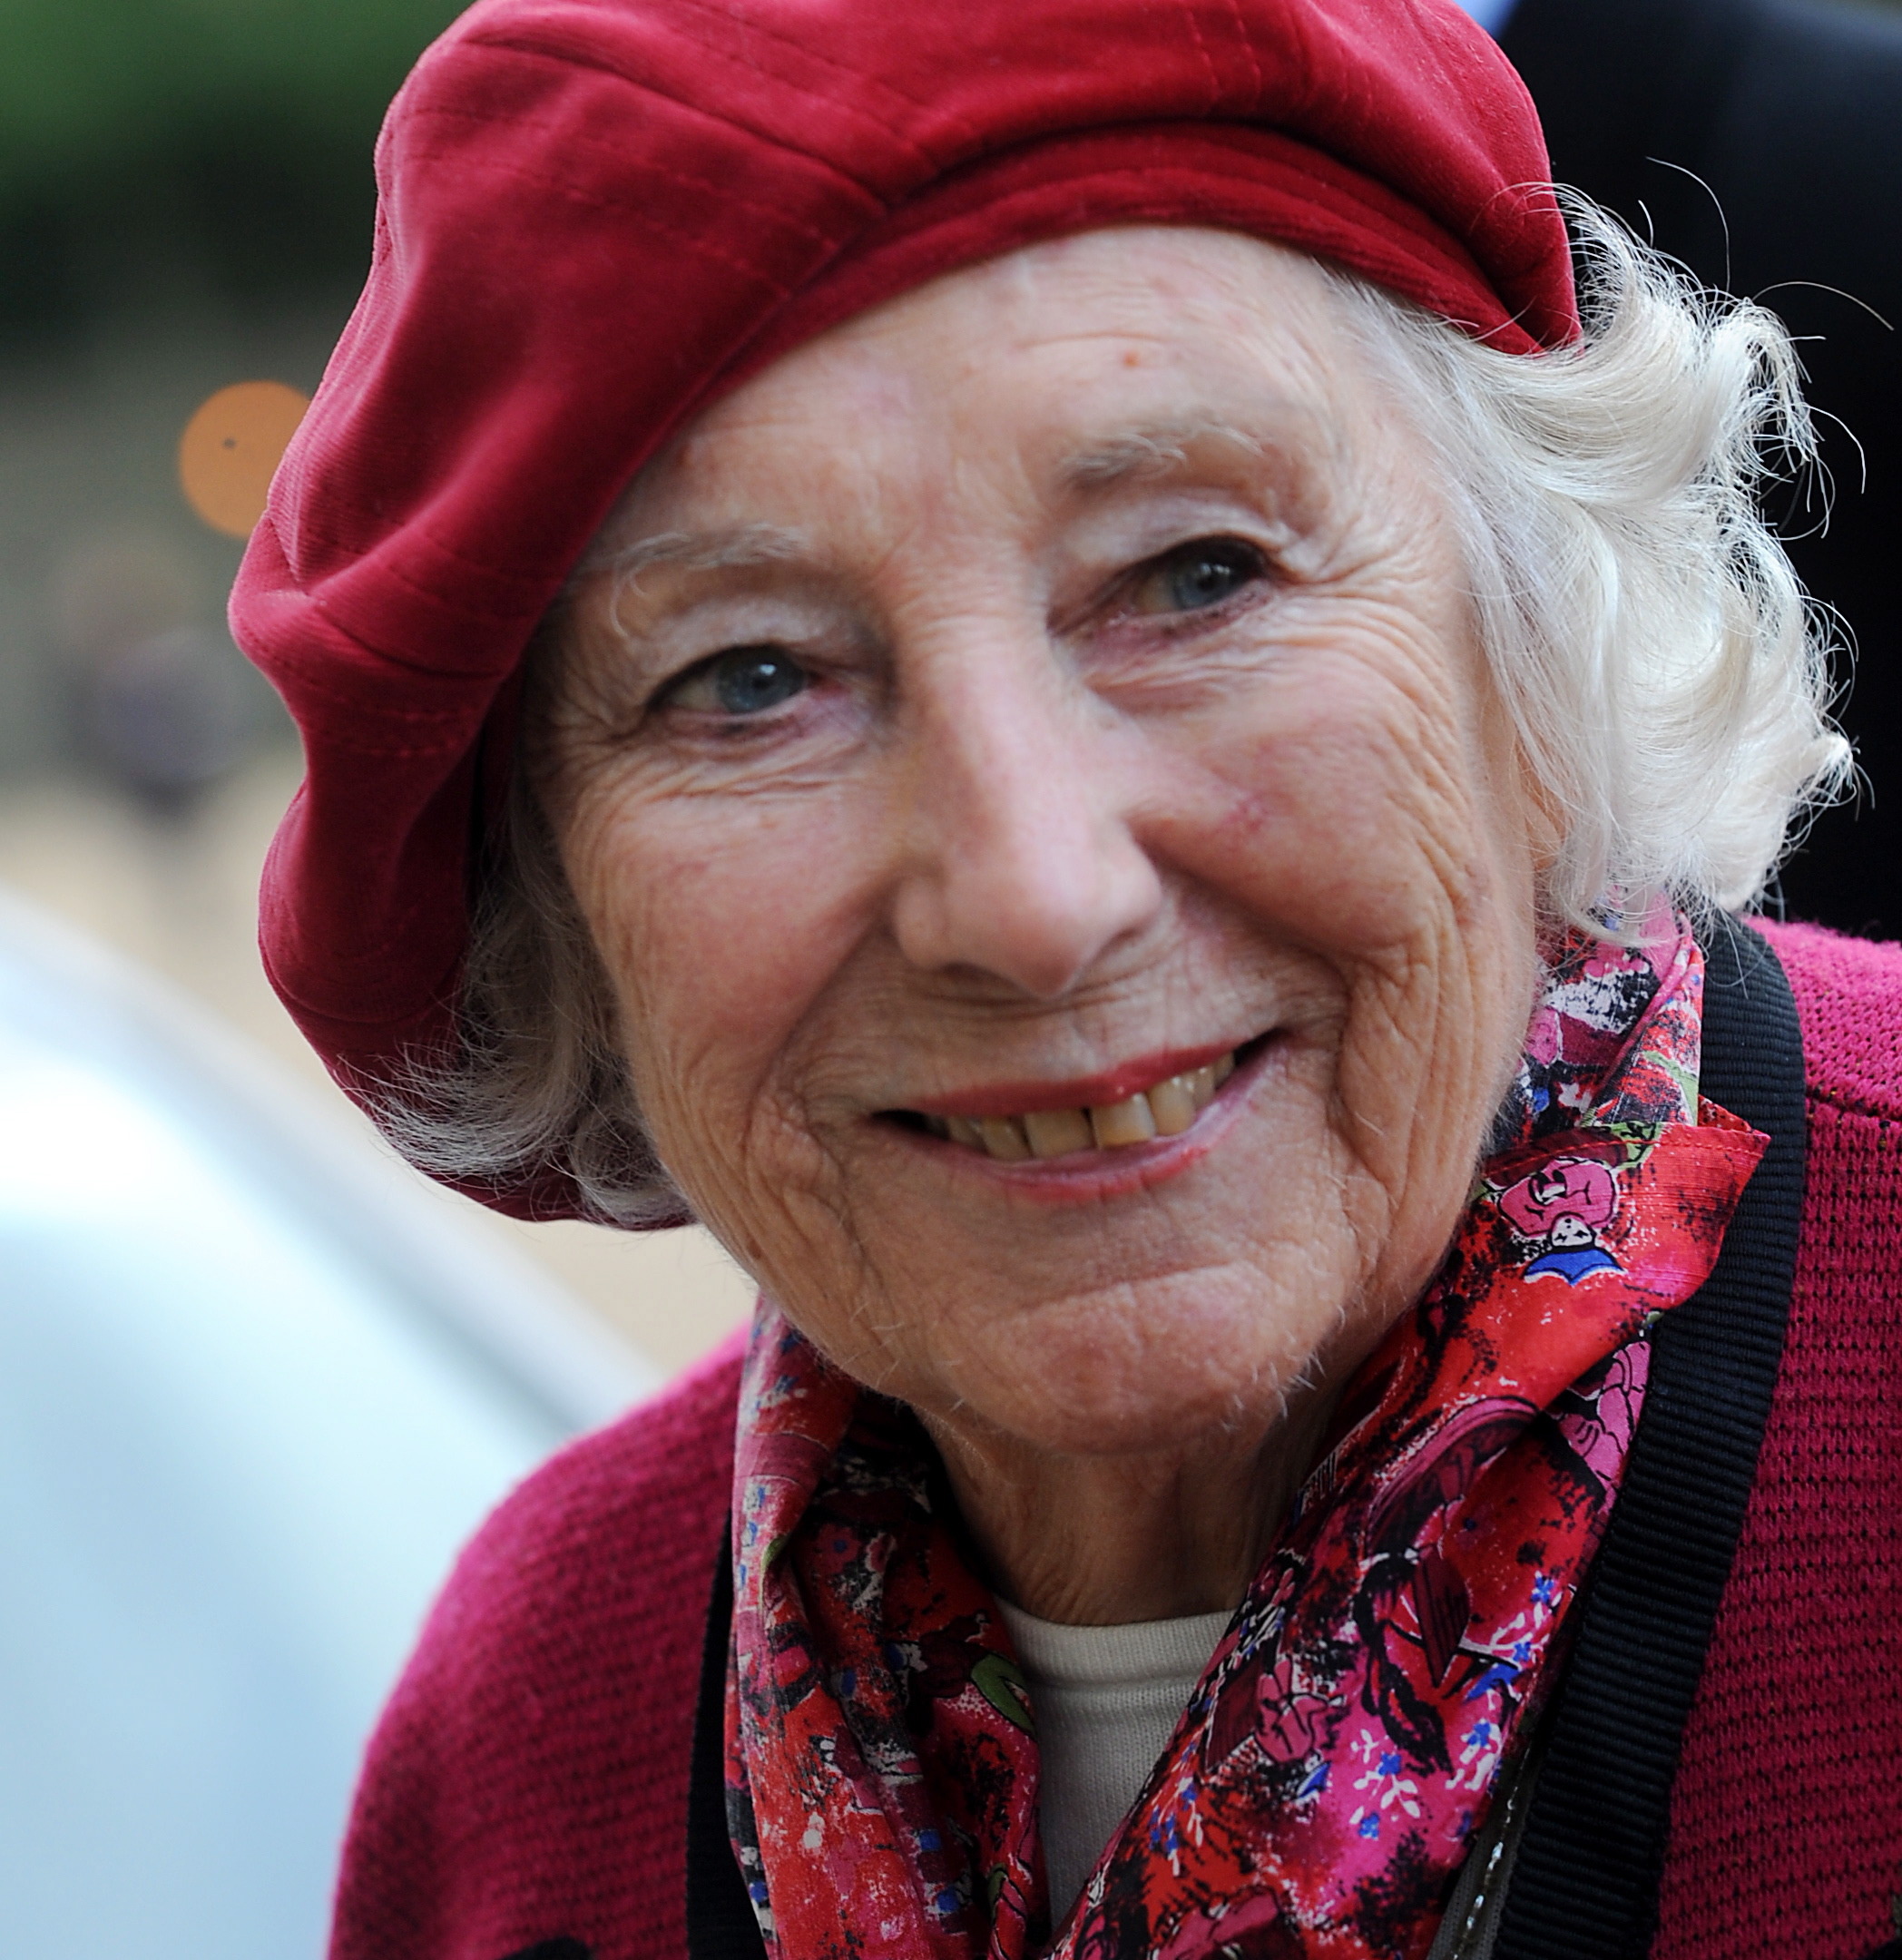 epa08492886 (FILE) - British singer Dame Vera Lynn arriving for the 2009 Poppy Appeal launch in central London, Britain, 22 October 2009. Dame Vera Lynn had died on 18 June 2020, aged 103.  EPA/ANDY RAIN *** Local Caption *** 01906486